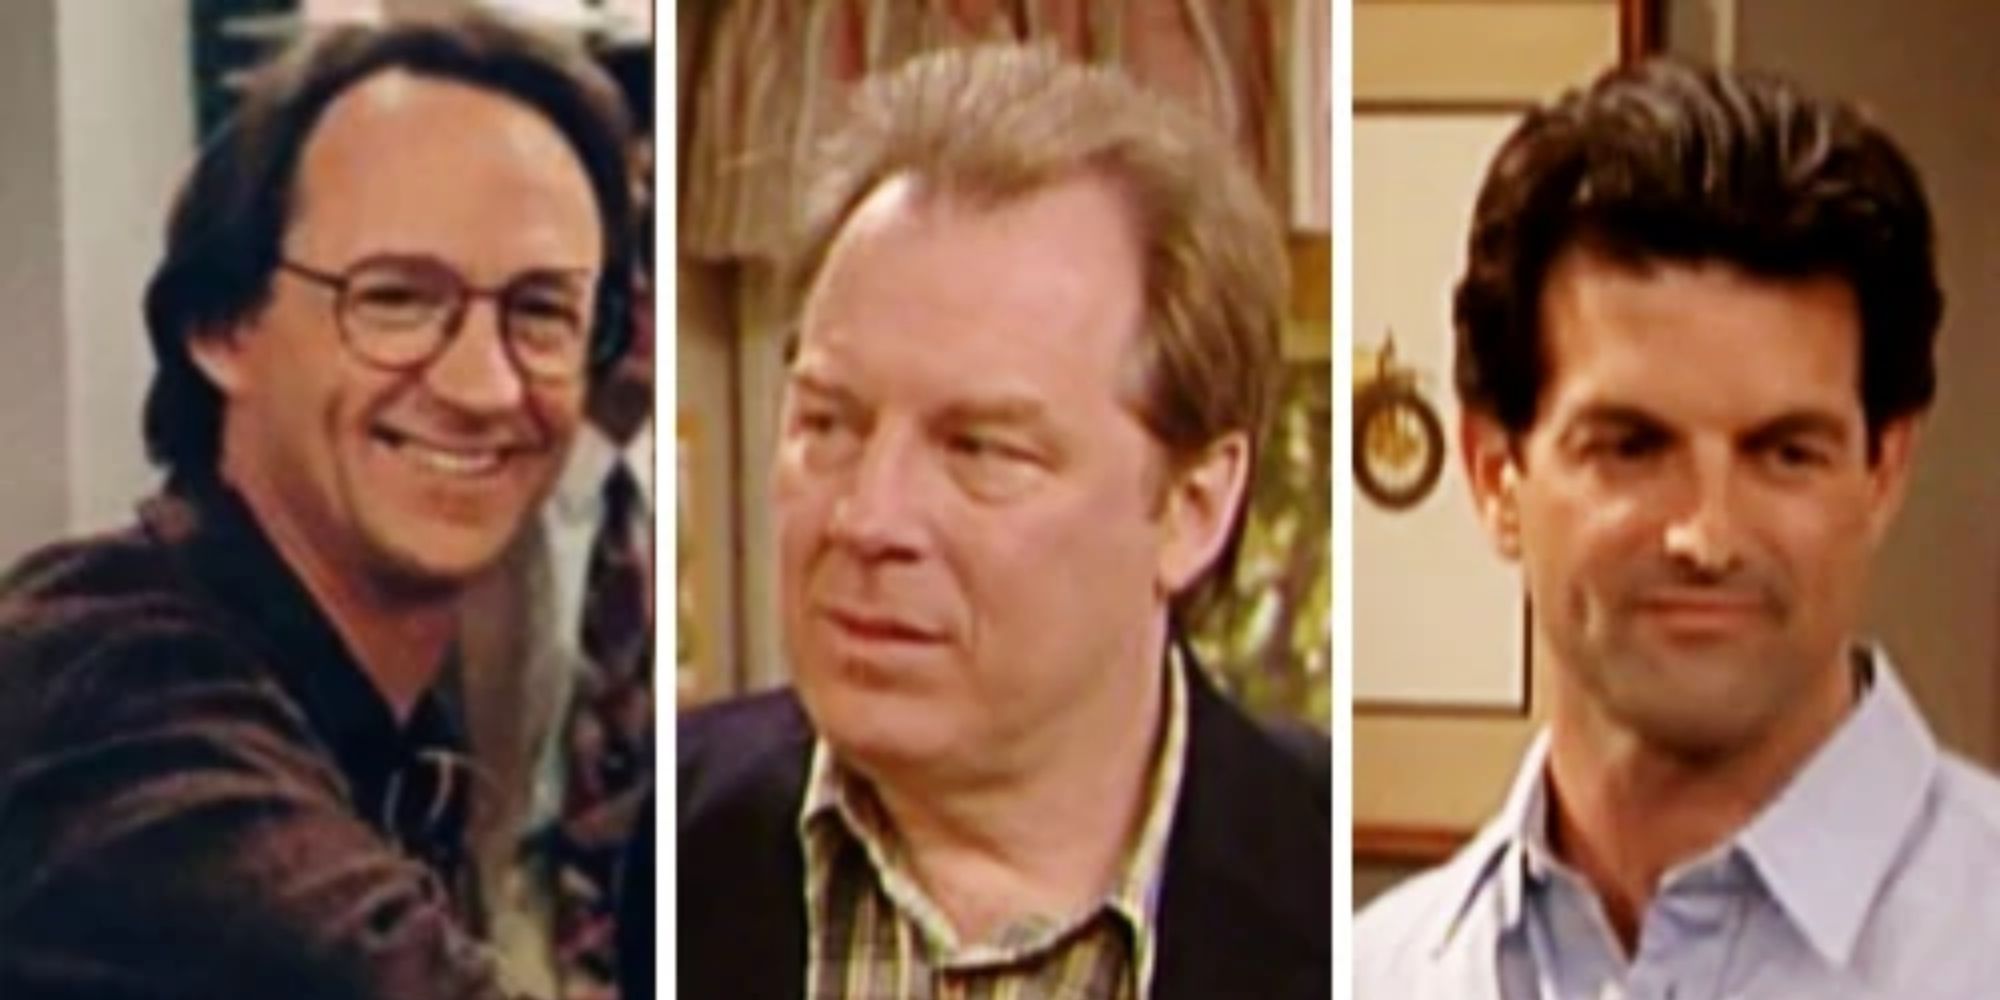 The changing dads of Boy Meets World